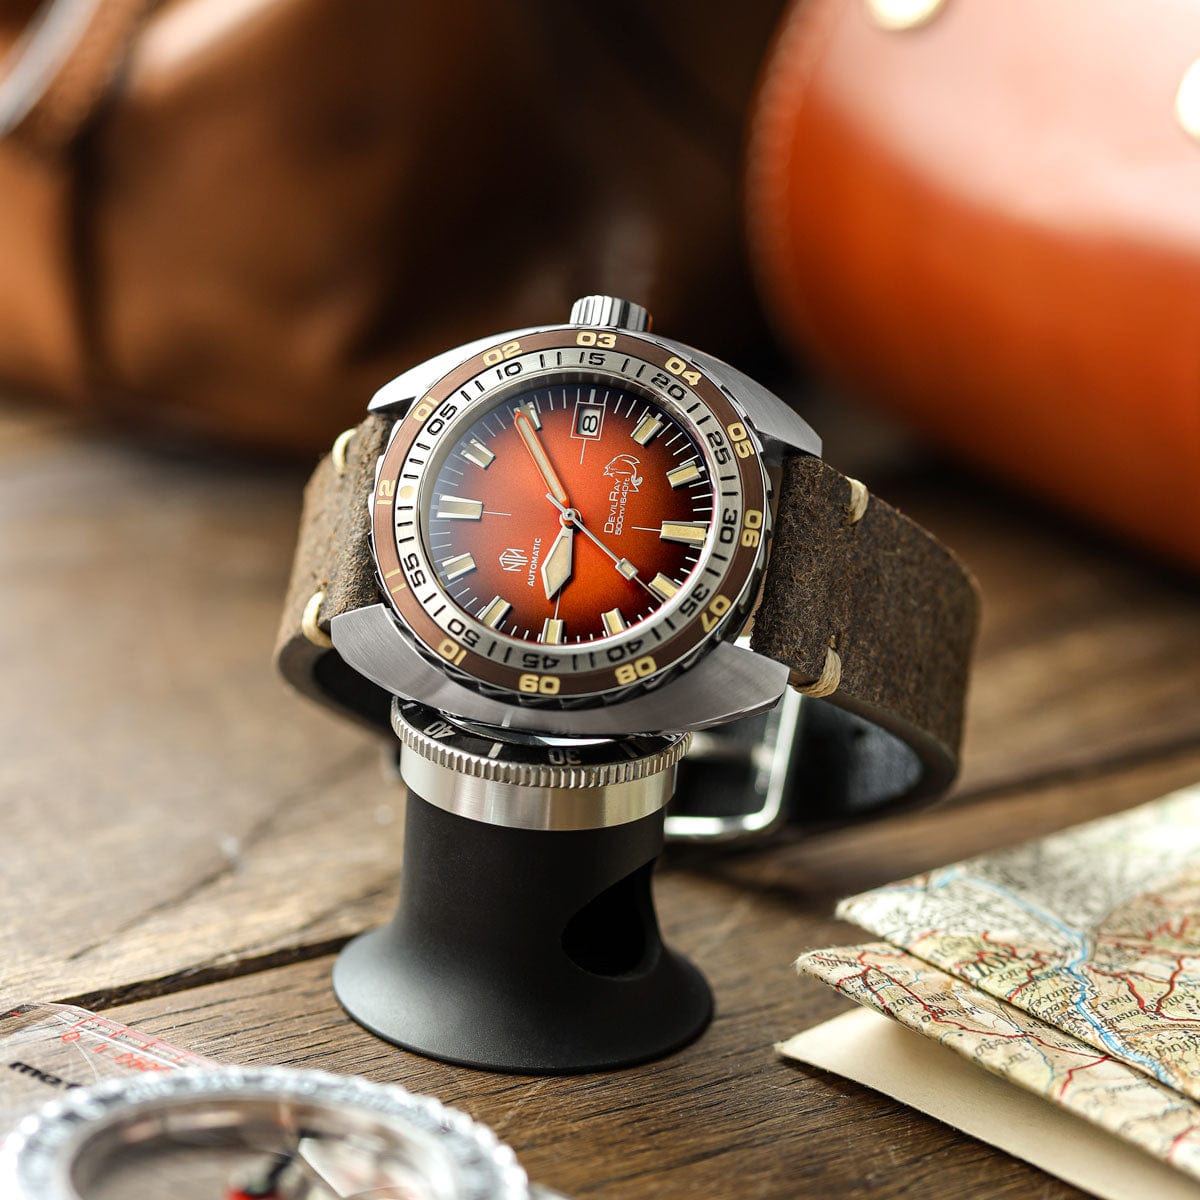 NTH and WatchGecko DevilRay Vintage Watches-nth-devilray-vintage-orange-leather-strap-watchgecko-exclusive-36670810423459_1200x